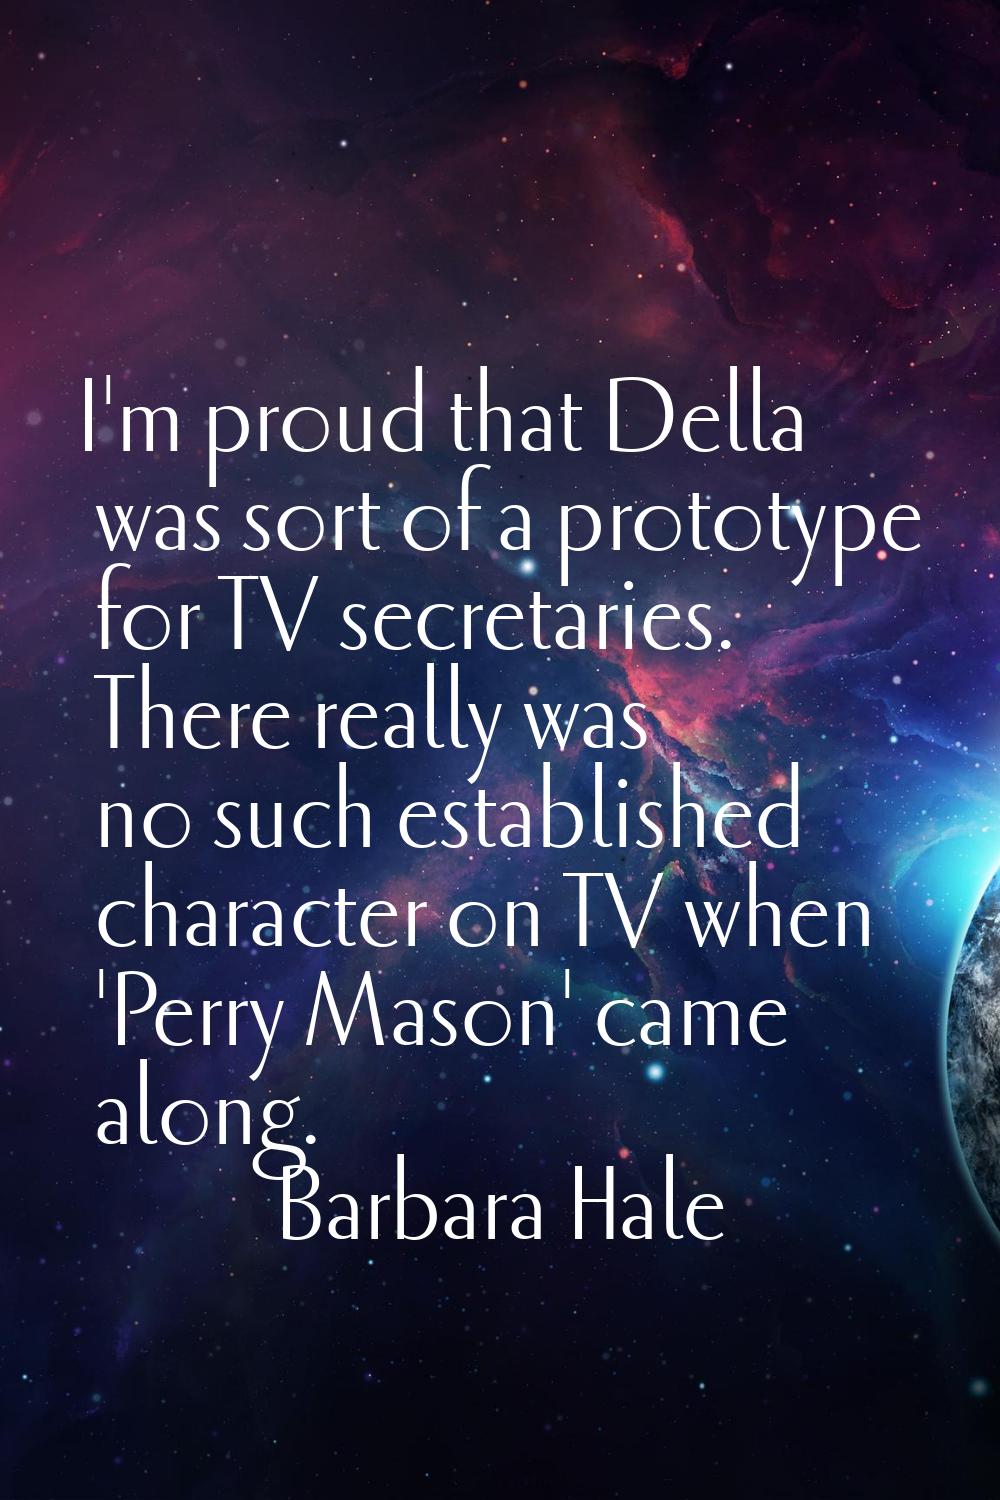 I'm proud that Della was sort of a prototype for TV secretaries. There really was no such establish